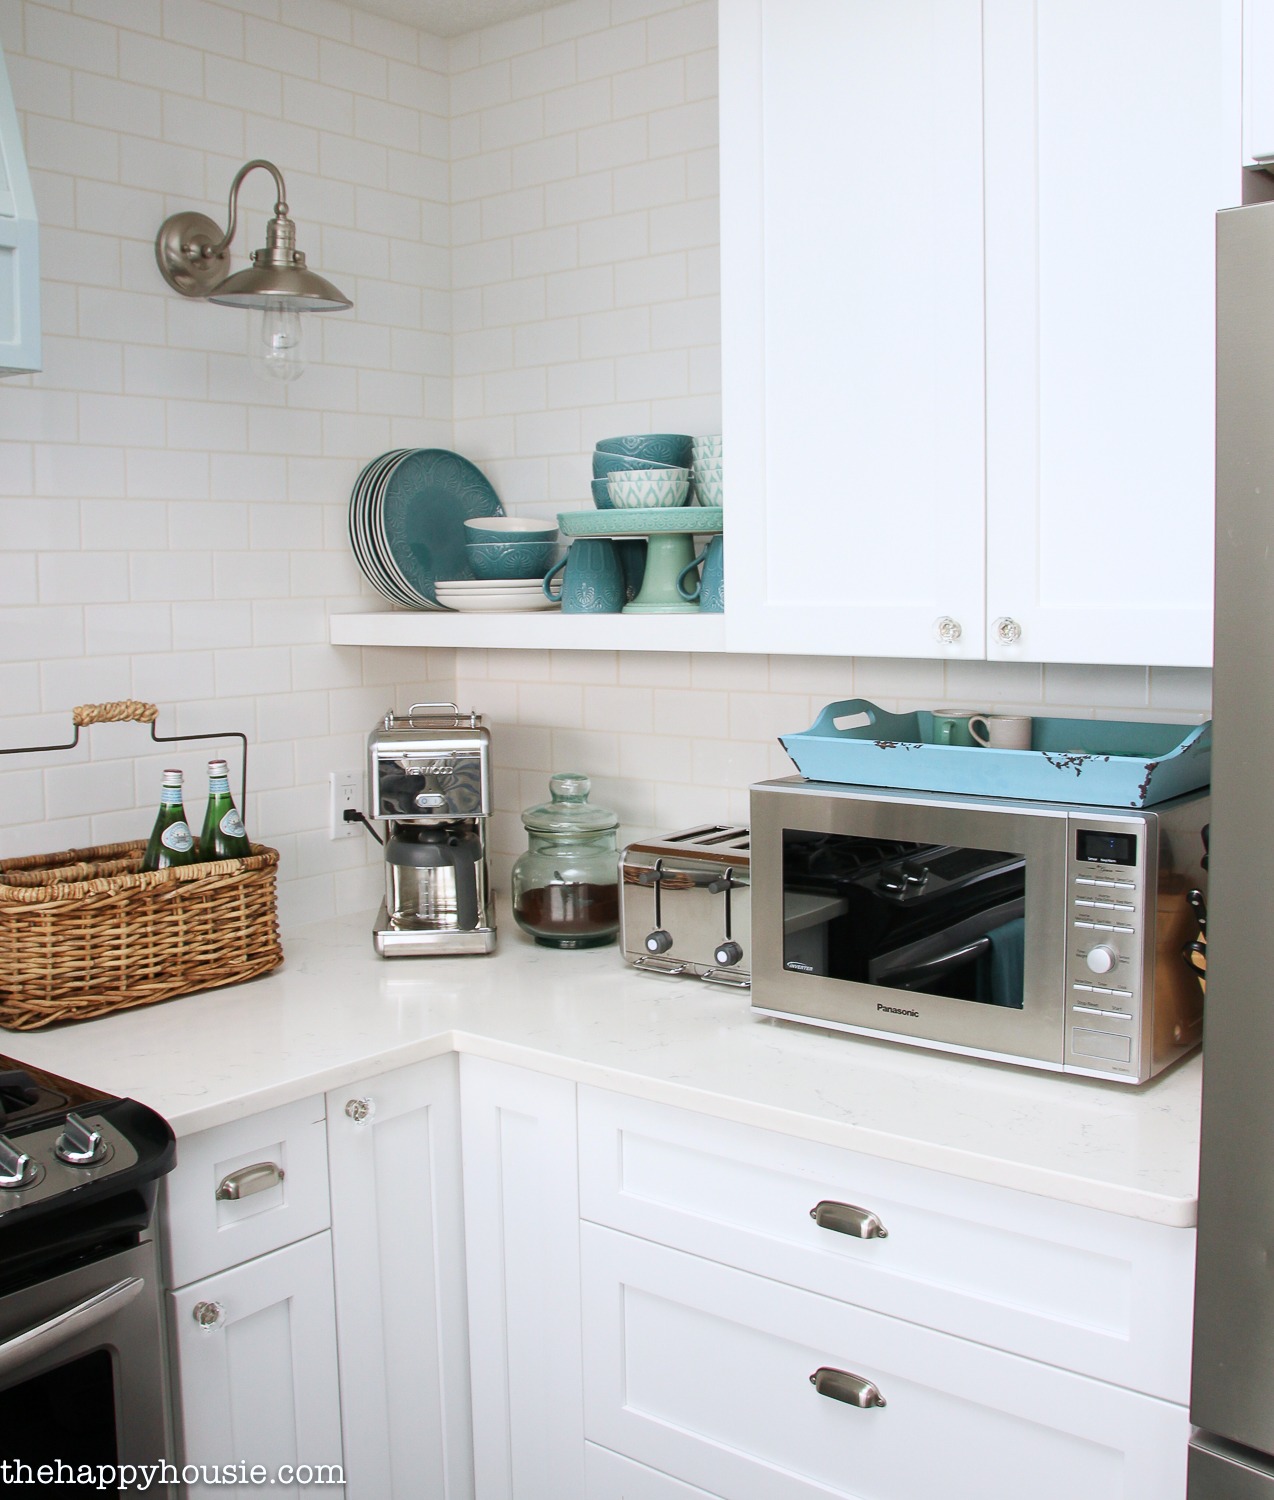 Finish Off Your Kitchen With Beautiful Small Appliances